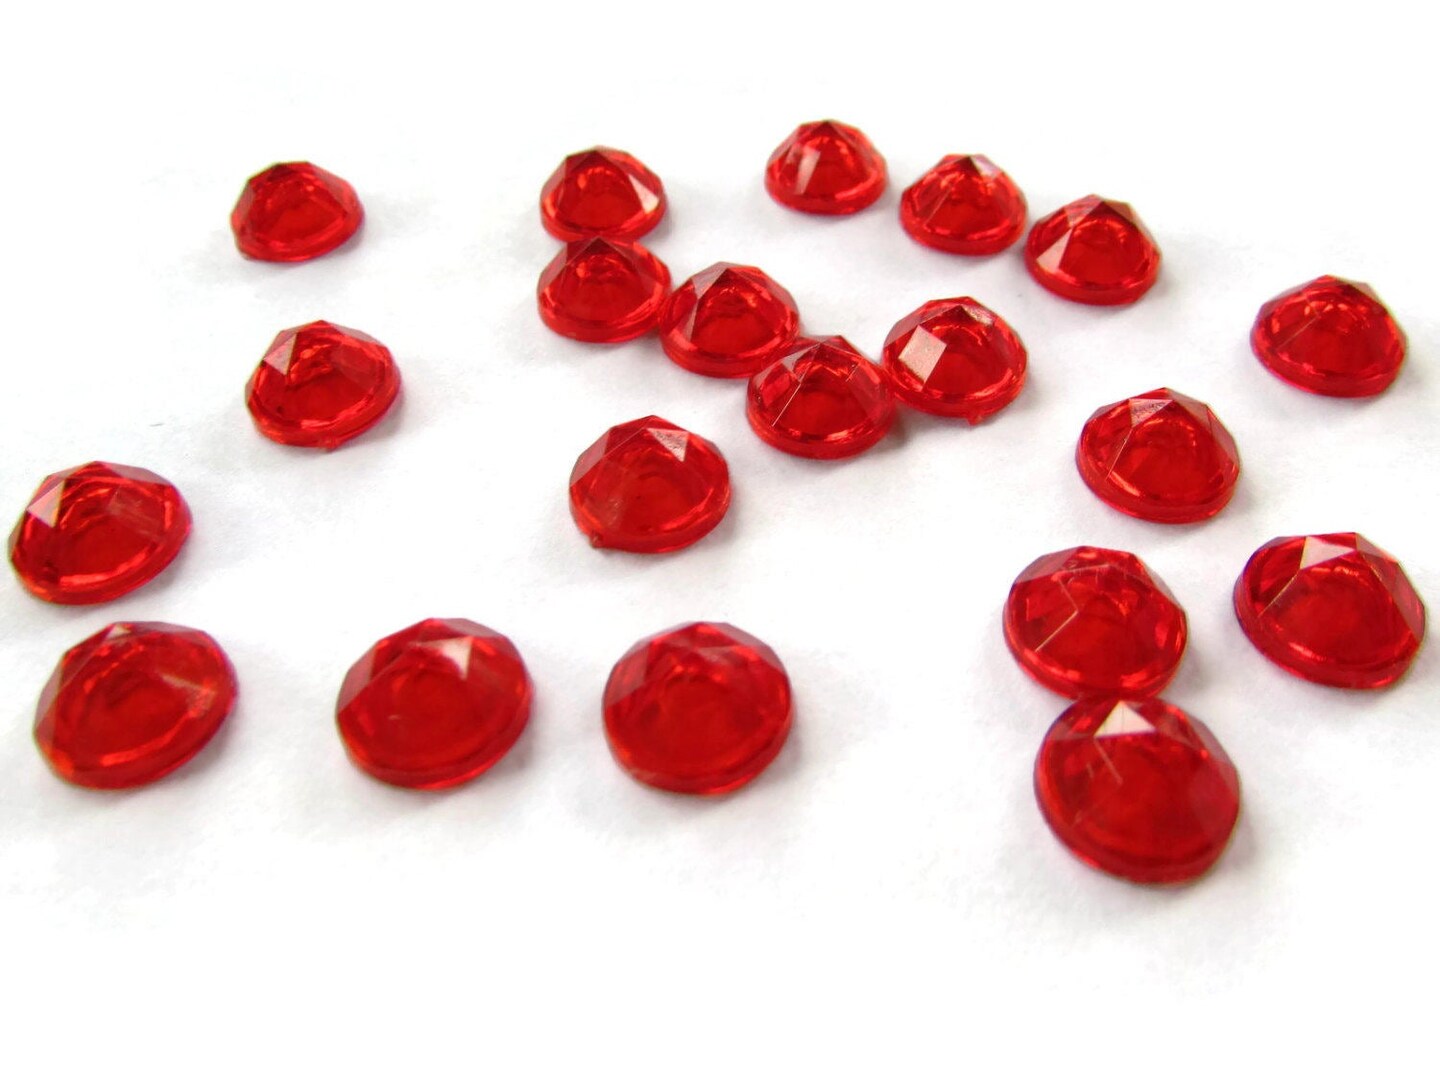 40 9mm Round Red Faceted Vintage Plastic Cabochons Hollow Back Dome Cabochons